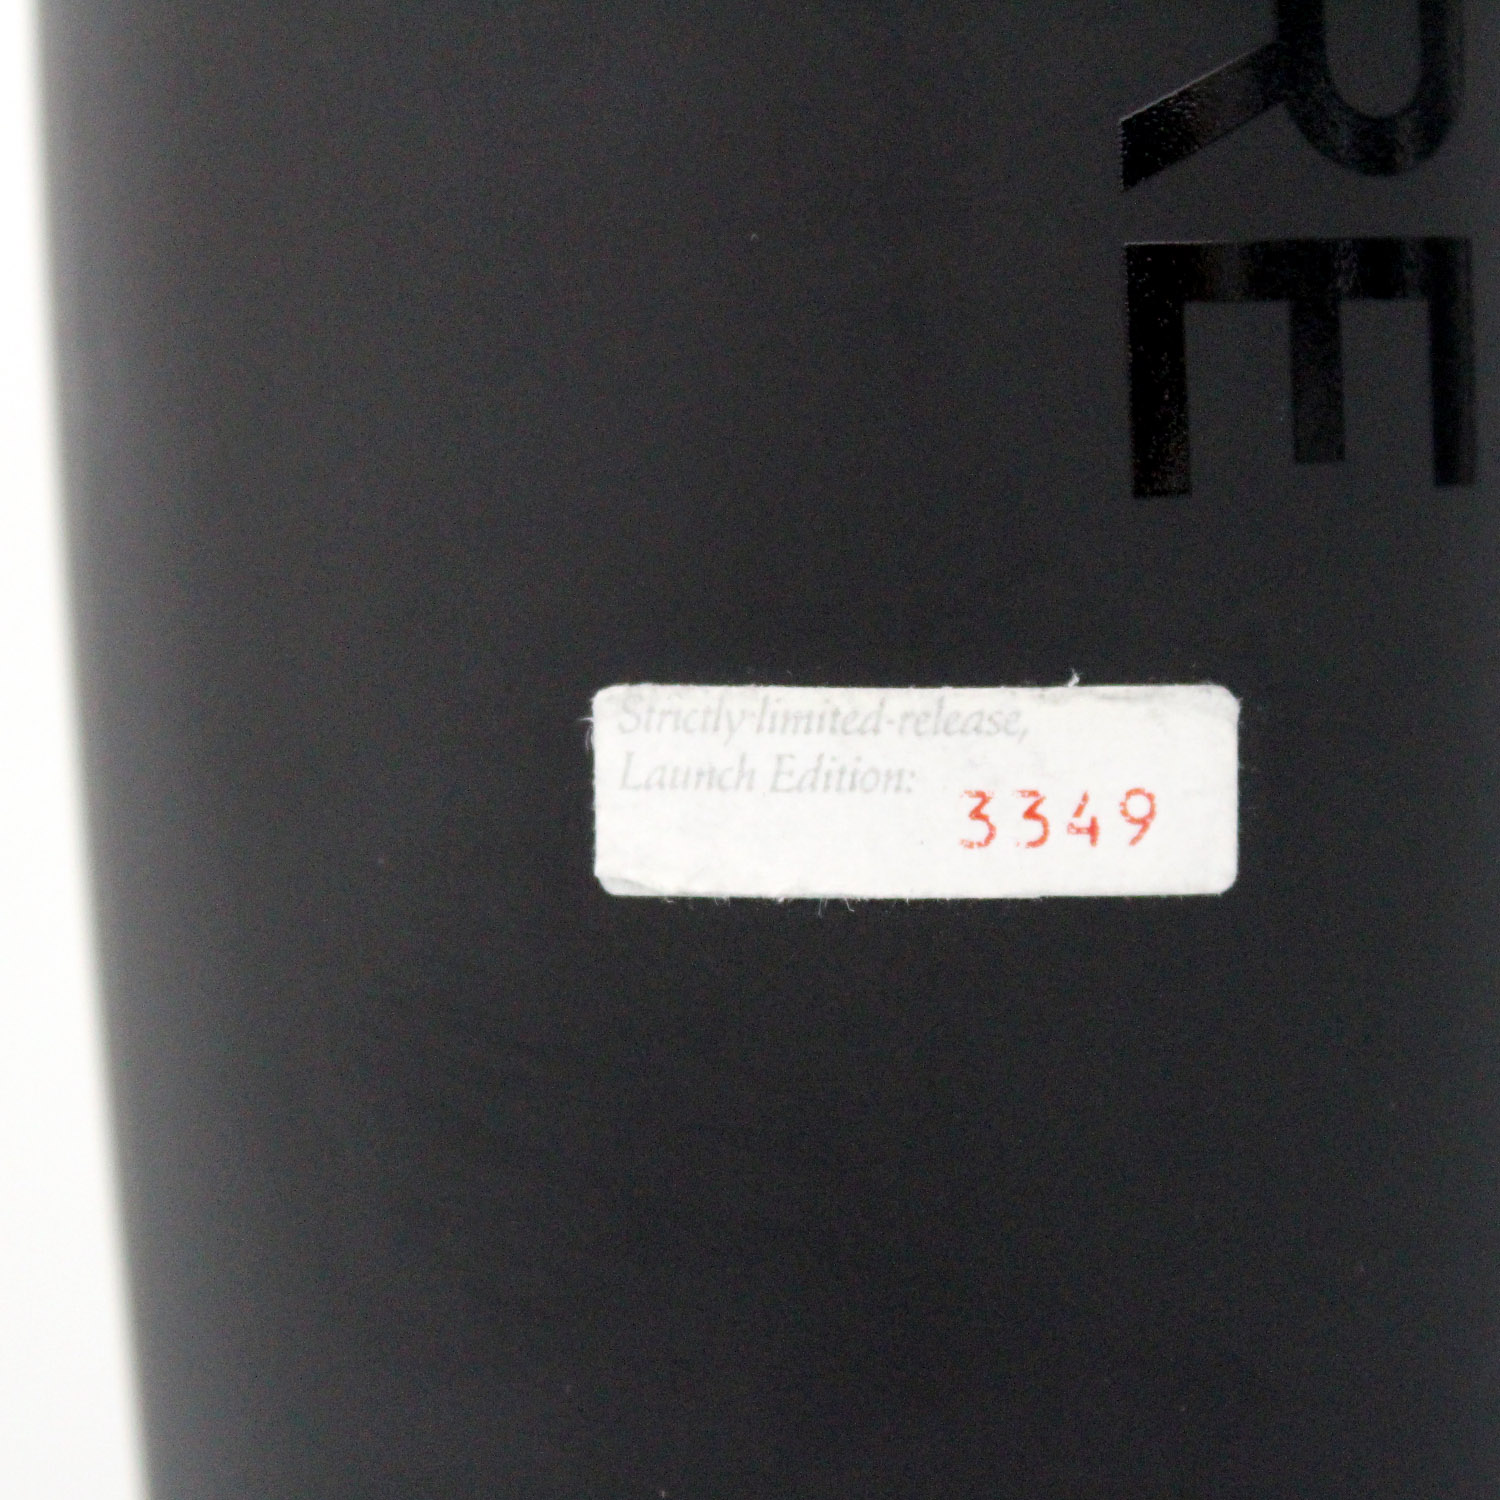 Bruichladdich Octomore 01.1 First Edition number